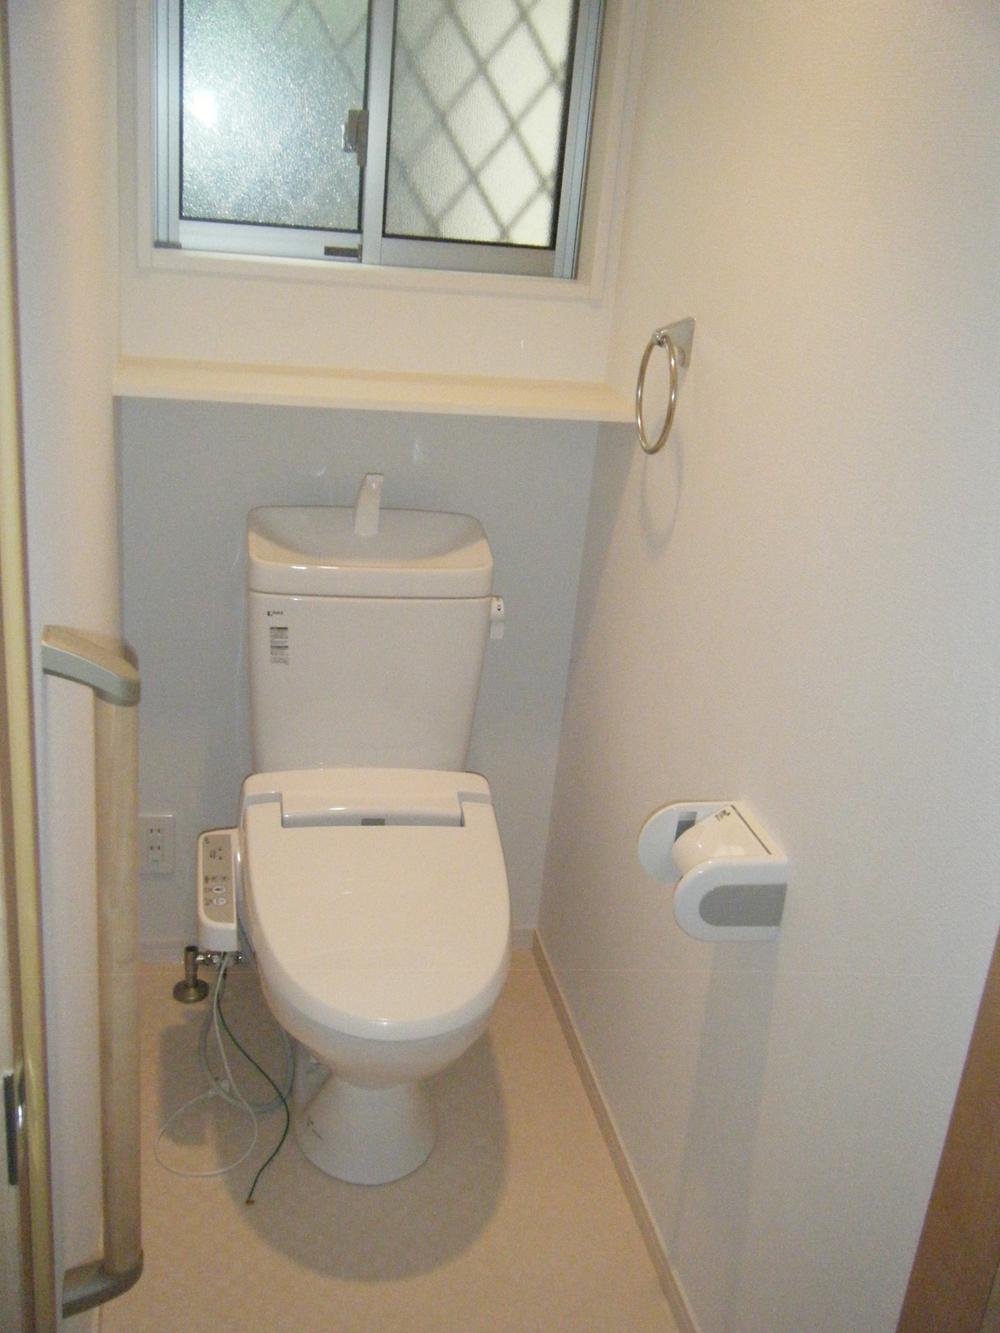 Toilet. Same specifications image